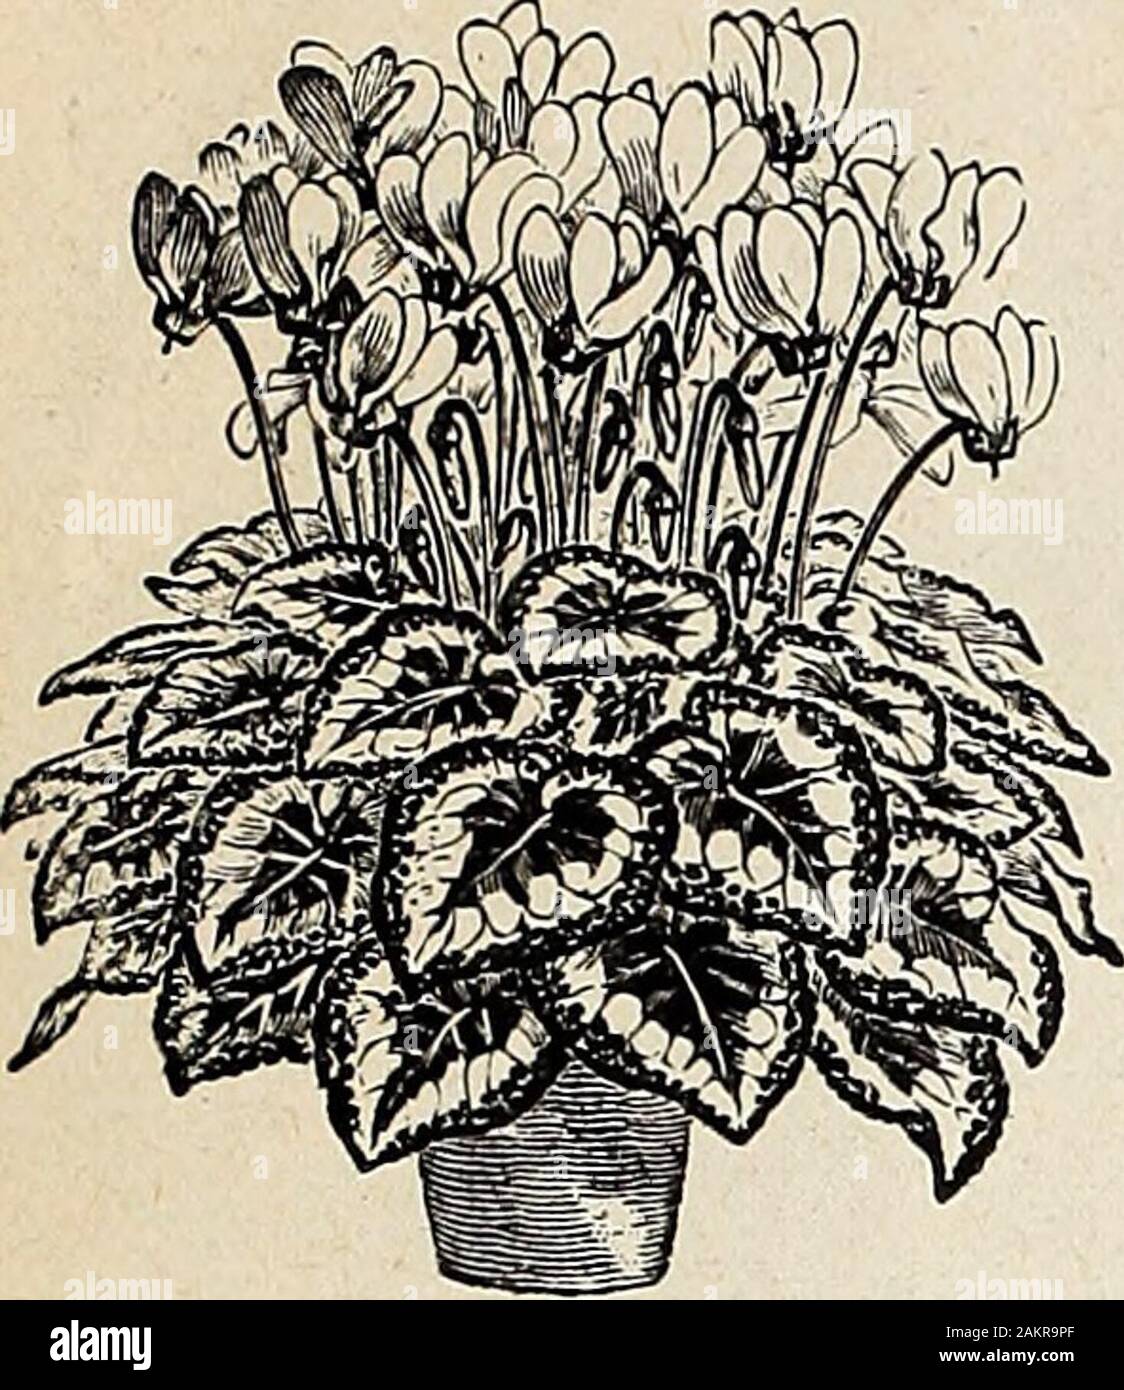 Currie's general wholesale catalogue for florists, market gardeners and truckers . much to the lasting qualities, and cannot fail toexcite the admiration of all lovers of the Cyclamen. White 100 seeds, $1.50 Rose, 100 seeds,- $2.25 CYCLANTHERA. EXPLODENS, Ornamental Climber 500 .10 CYPERUS. ALTERNIFOLIUS—Umbrella Plant 1,000 .10 CYPRESS VINE—Ipomoea auamoclit. ROSE SCARLET WHITE SCARLET, Ivy Leaved MIXED DAHLIA. Start early indoors for early flowering. Thesingle sorts are valuable for cut flowers.Easilv flowered from seed the first season EXTRA CHOICE, Double Mixed 250 .20 SINGLE FINEST MIXED Stock Photo